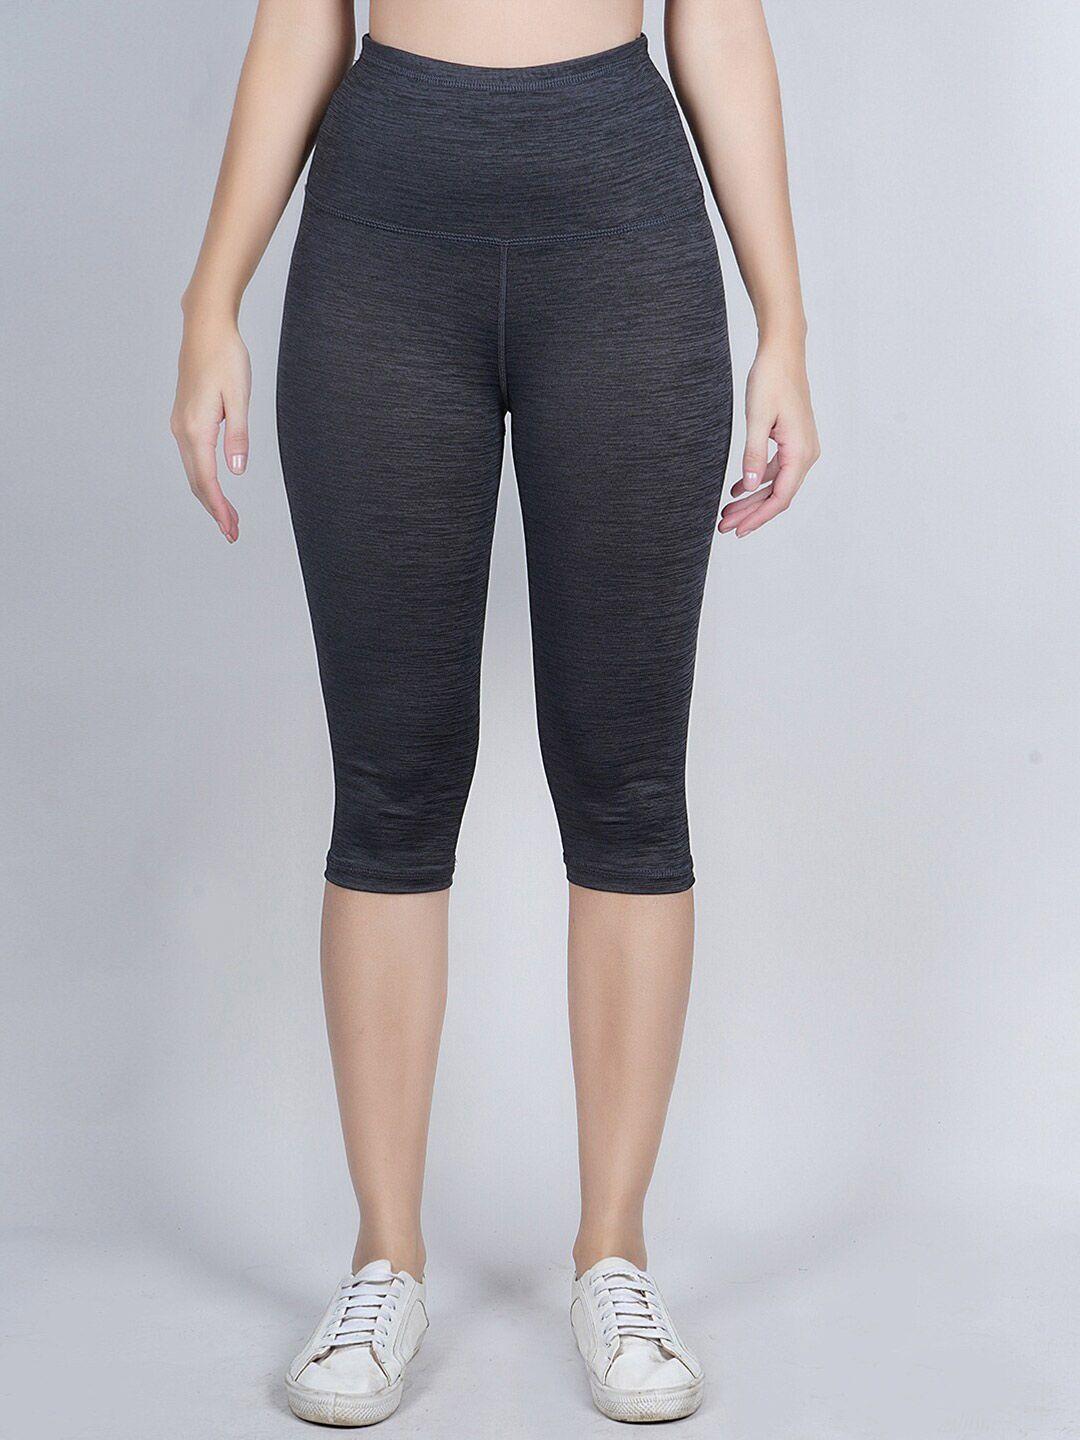 never lose high-rise tight fit capris